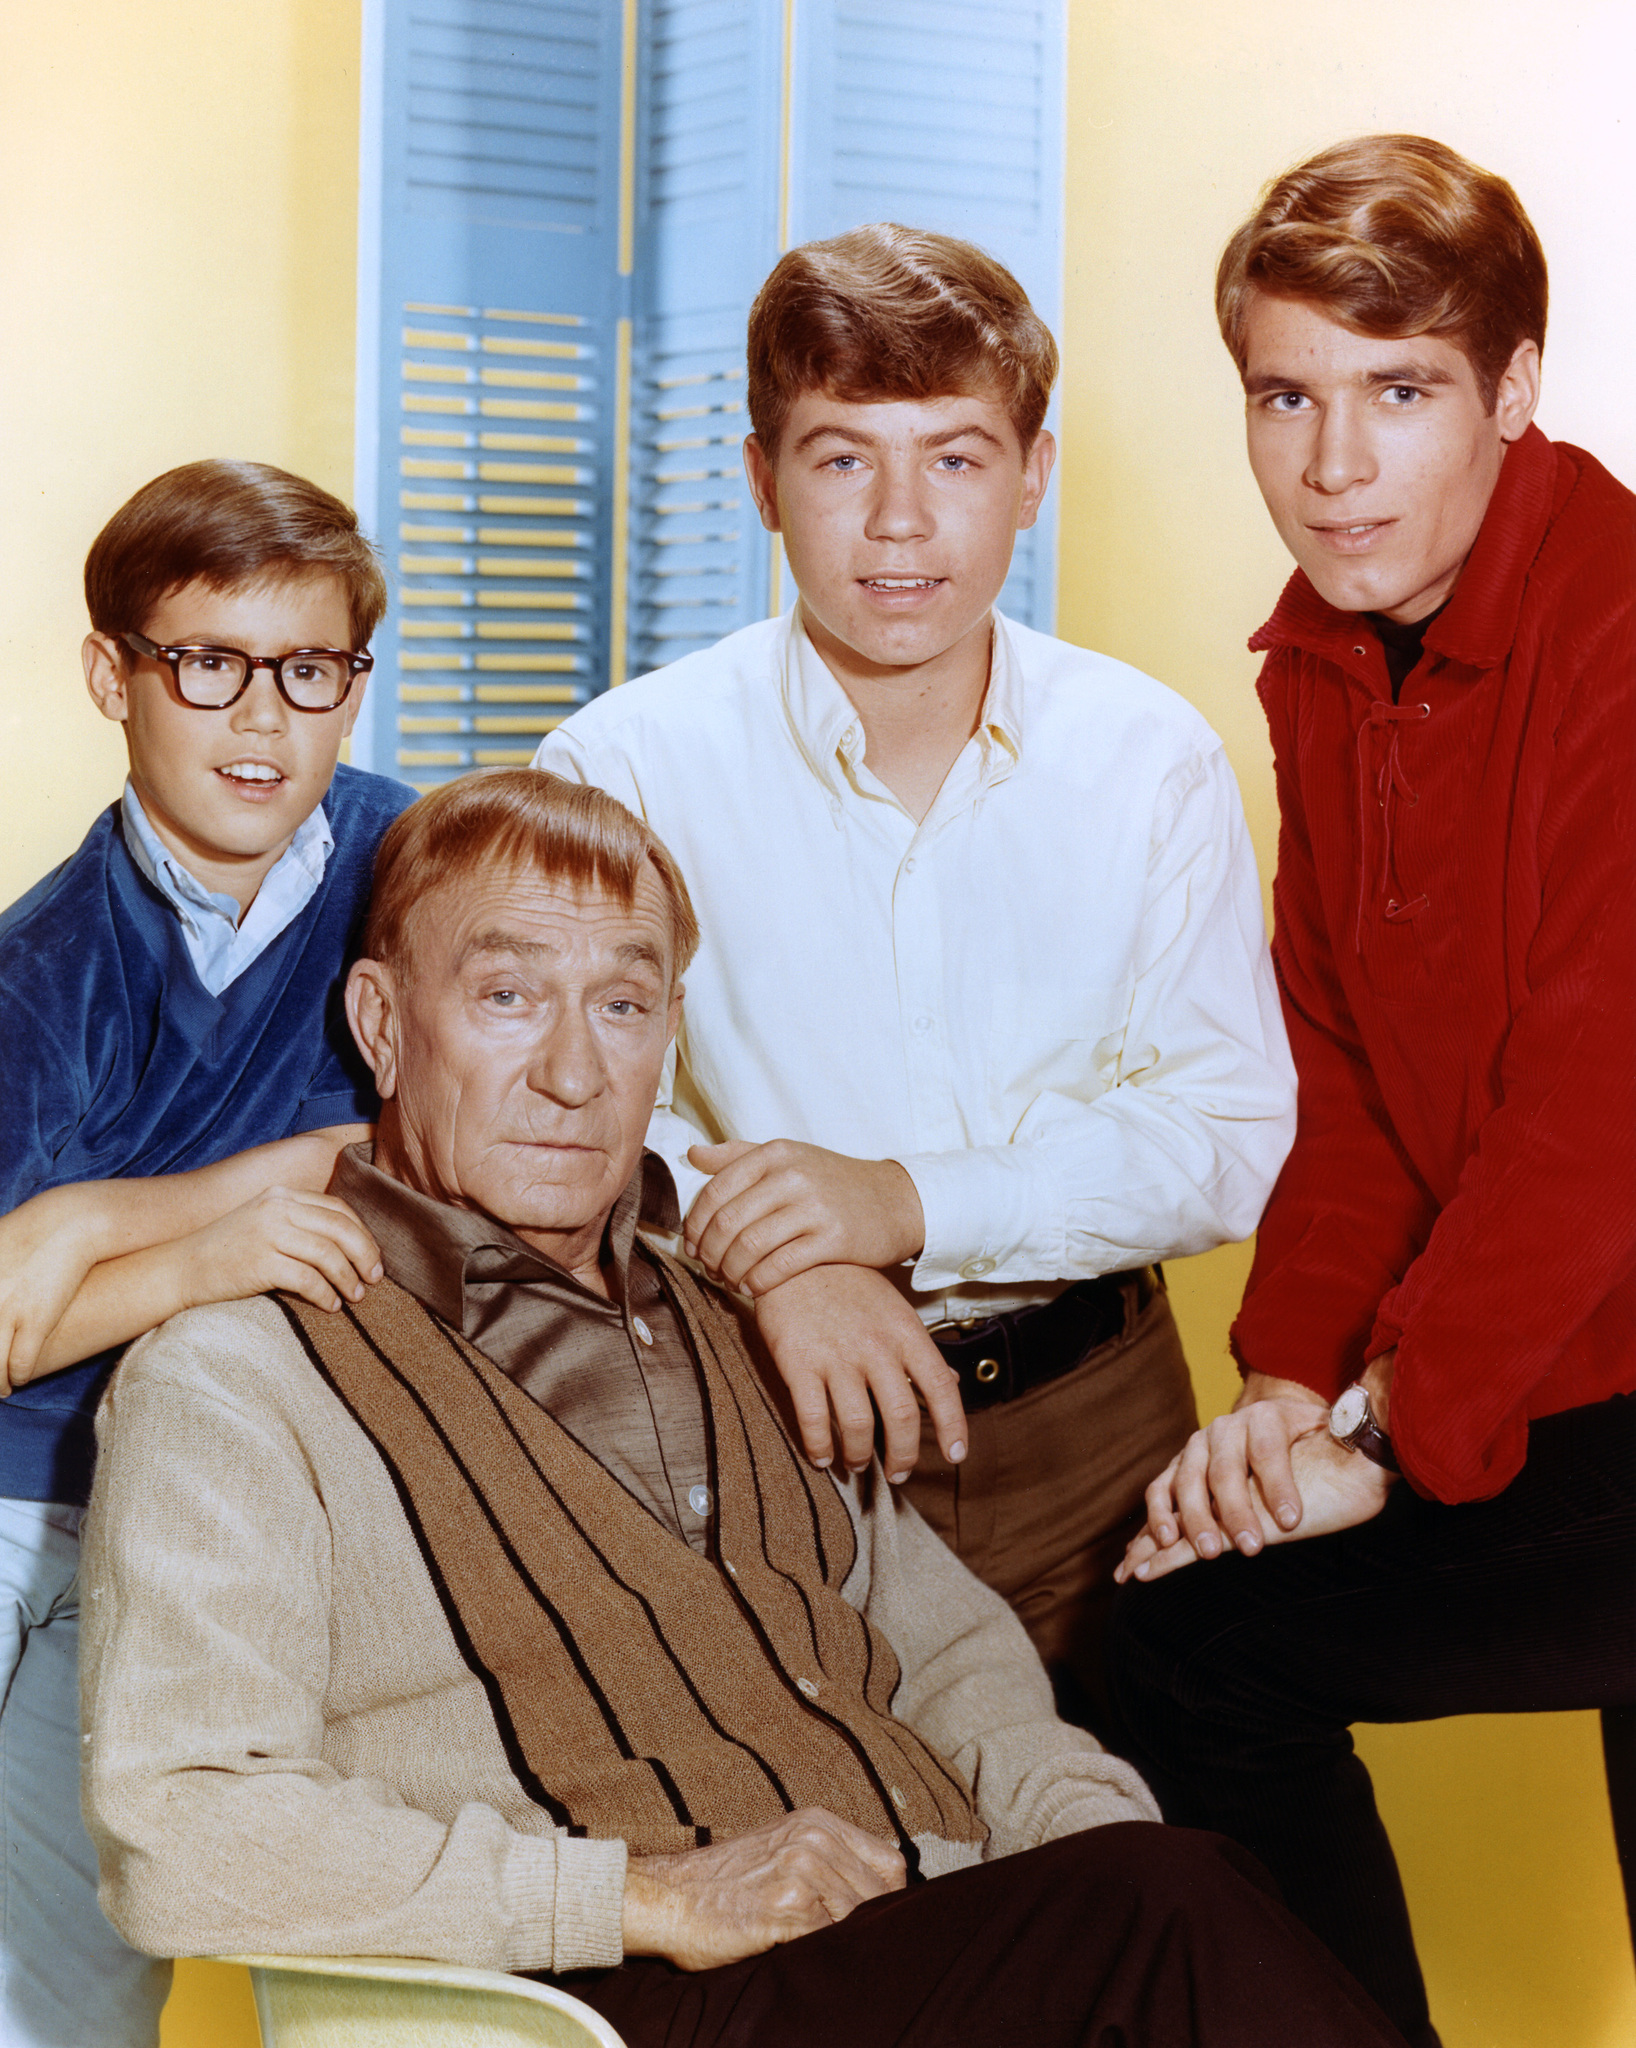 William Demarest, Don Grady, Barry Livingston and Stanley Livingston